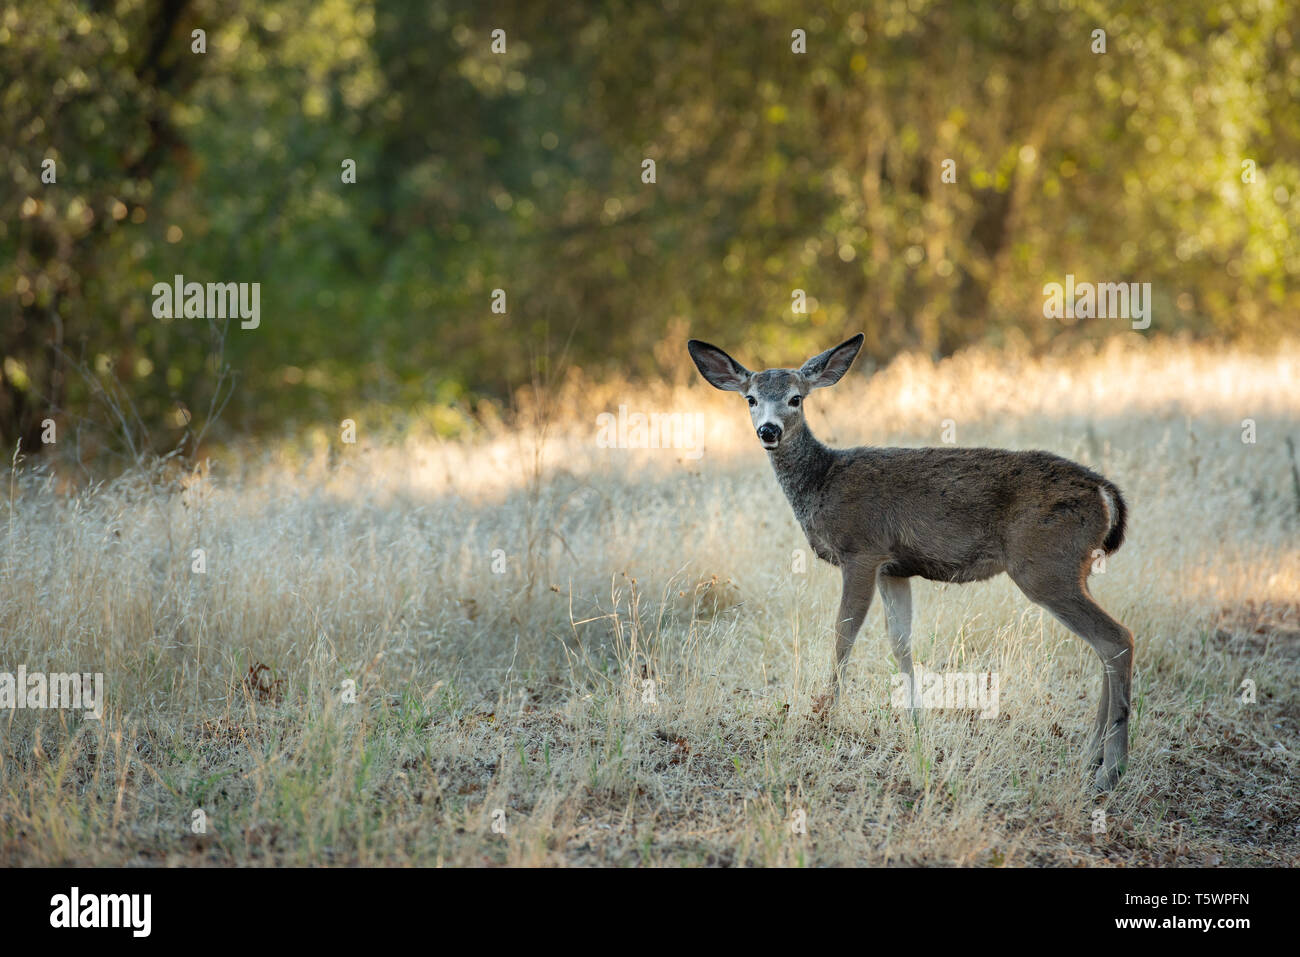 Yong Blacktaile Doe satanding broadside in dry grass surounded by oak woodlands looking at camera. Stock Photo